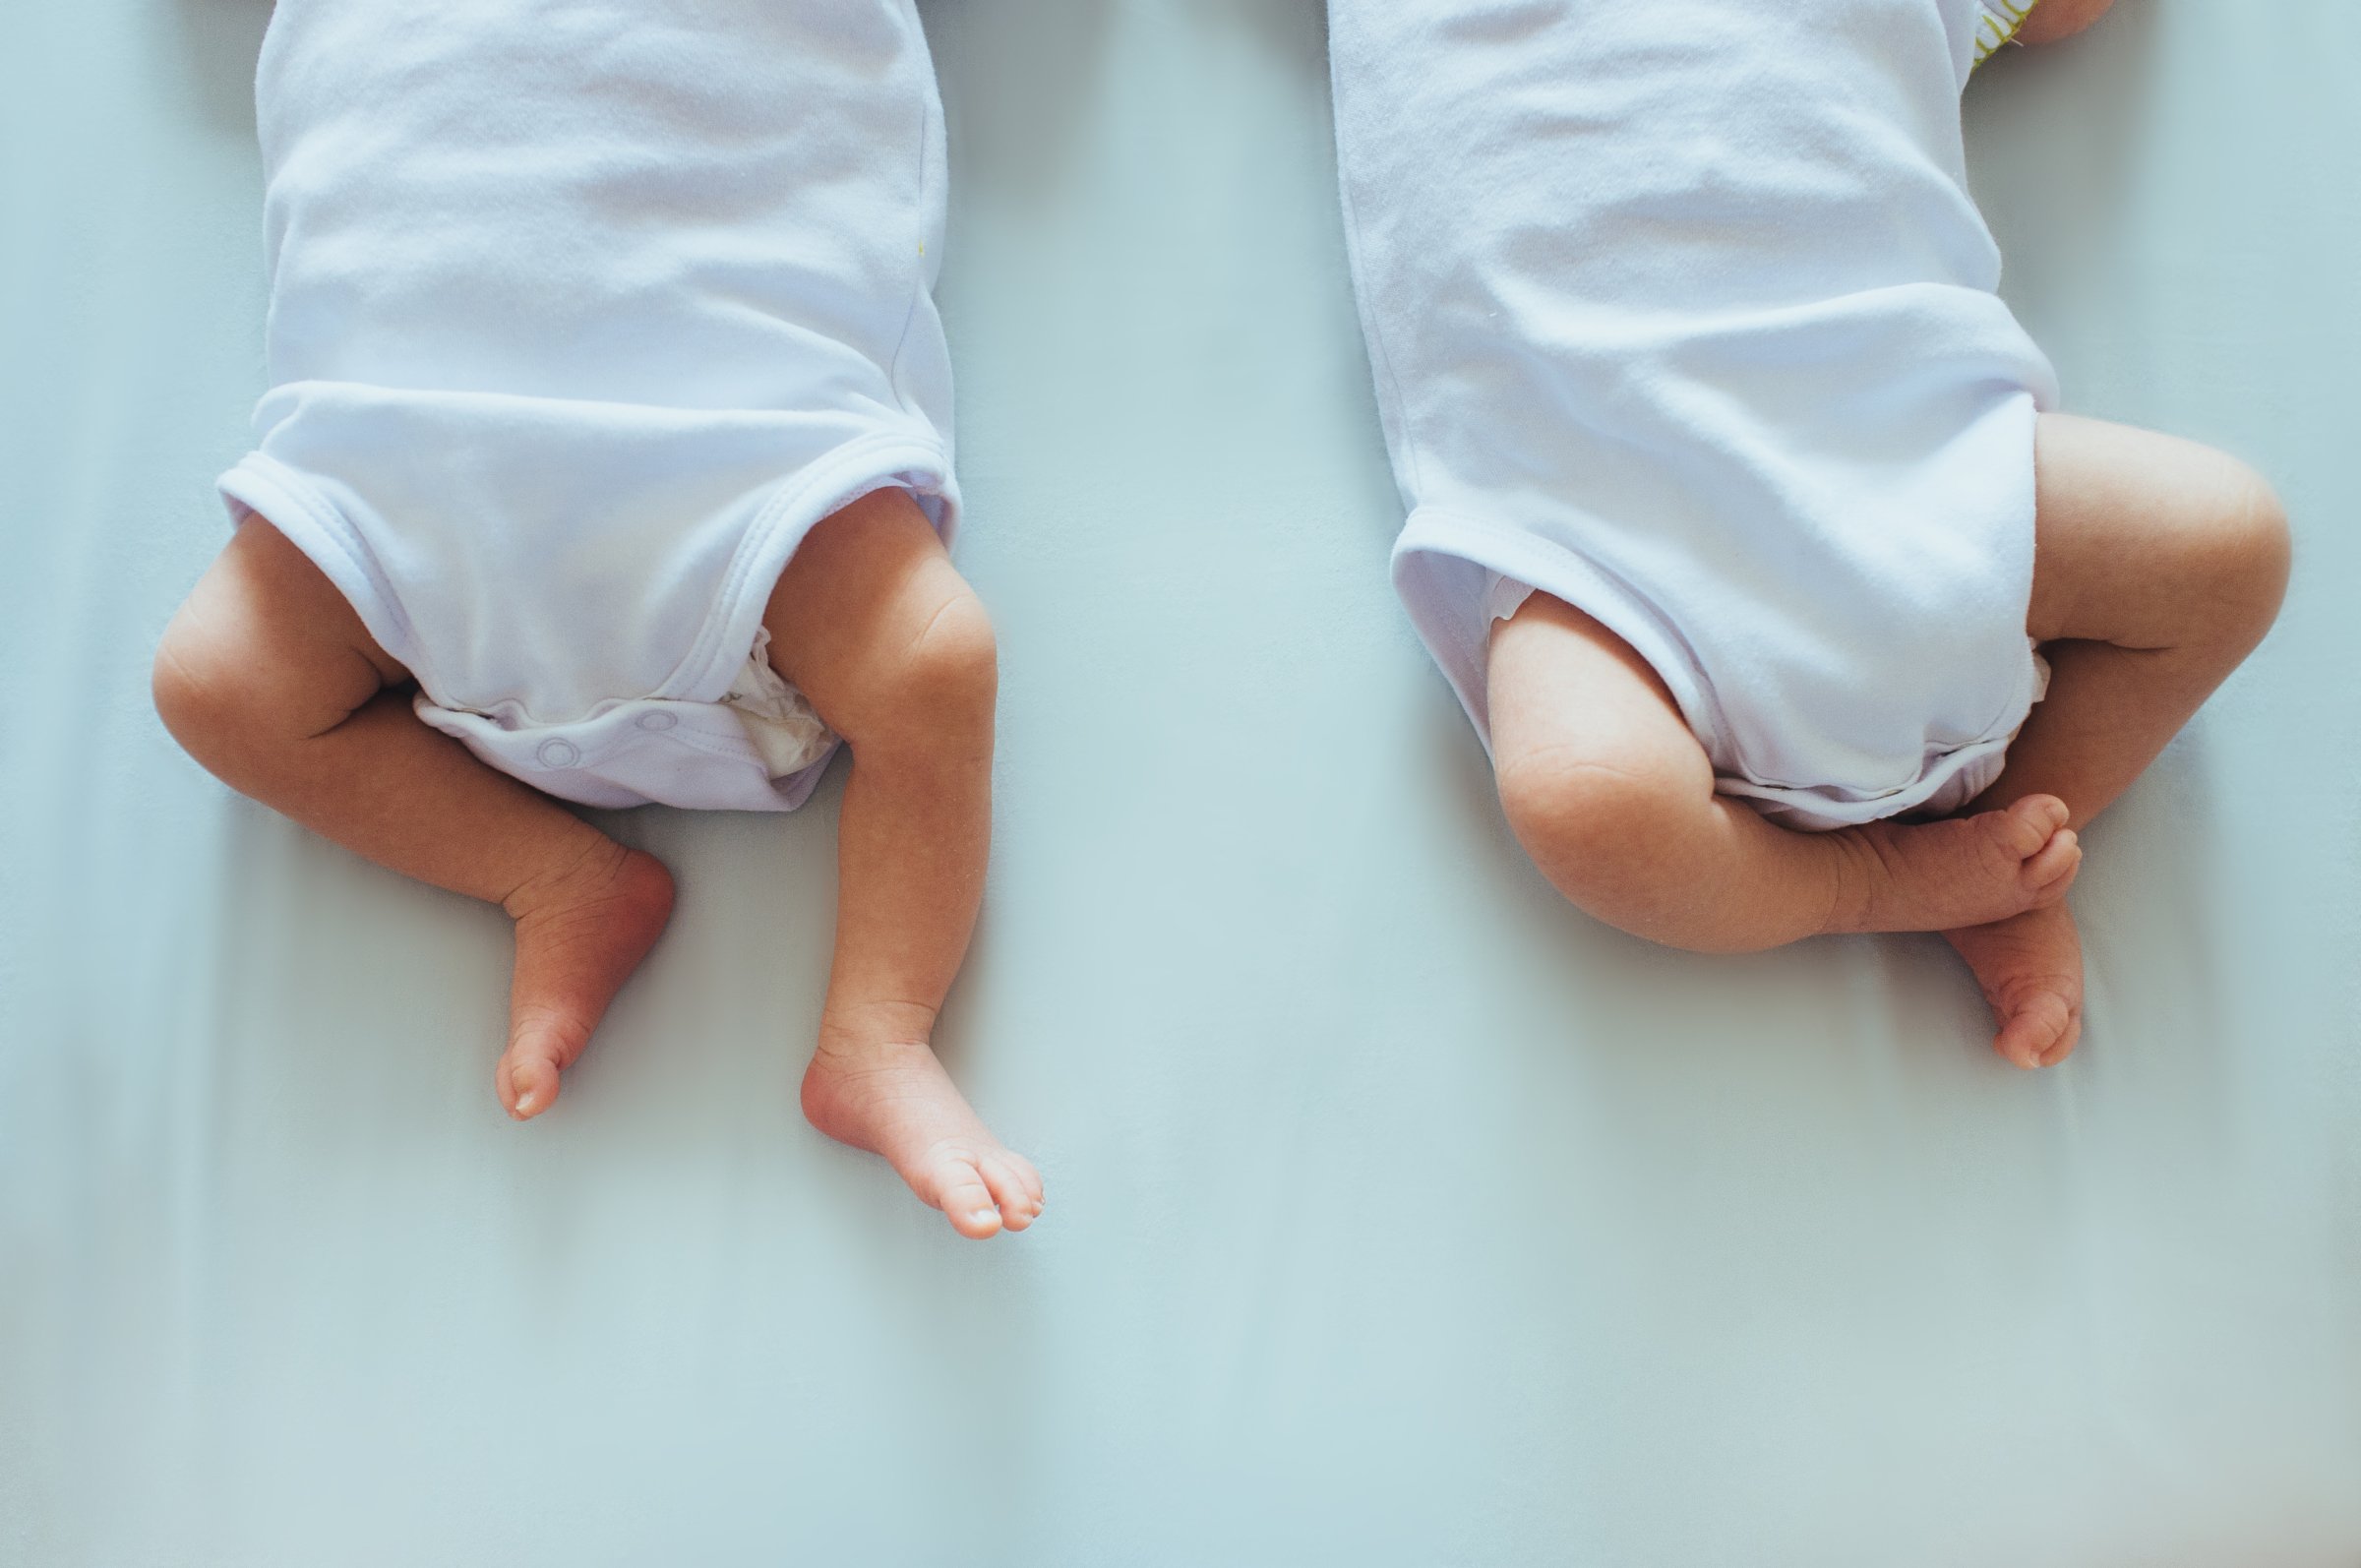 Photo of 2 babies on bed focusing on their legs.